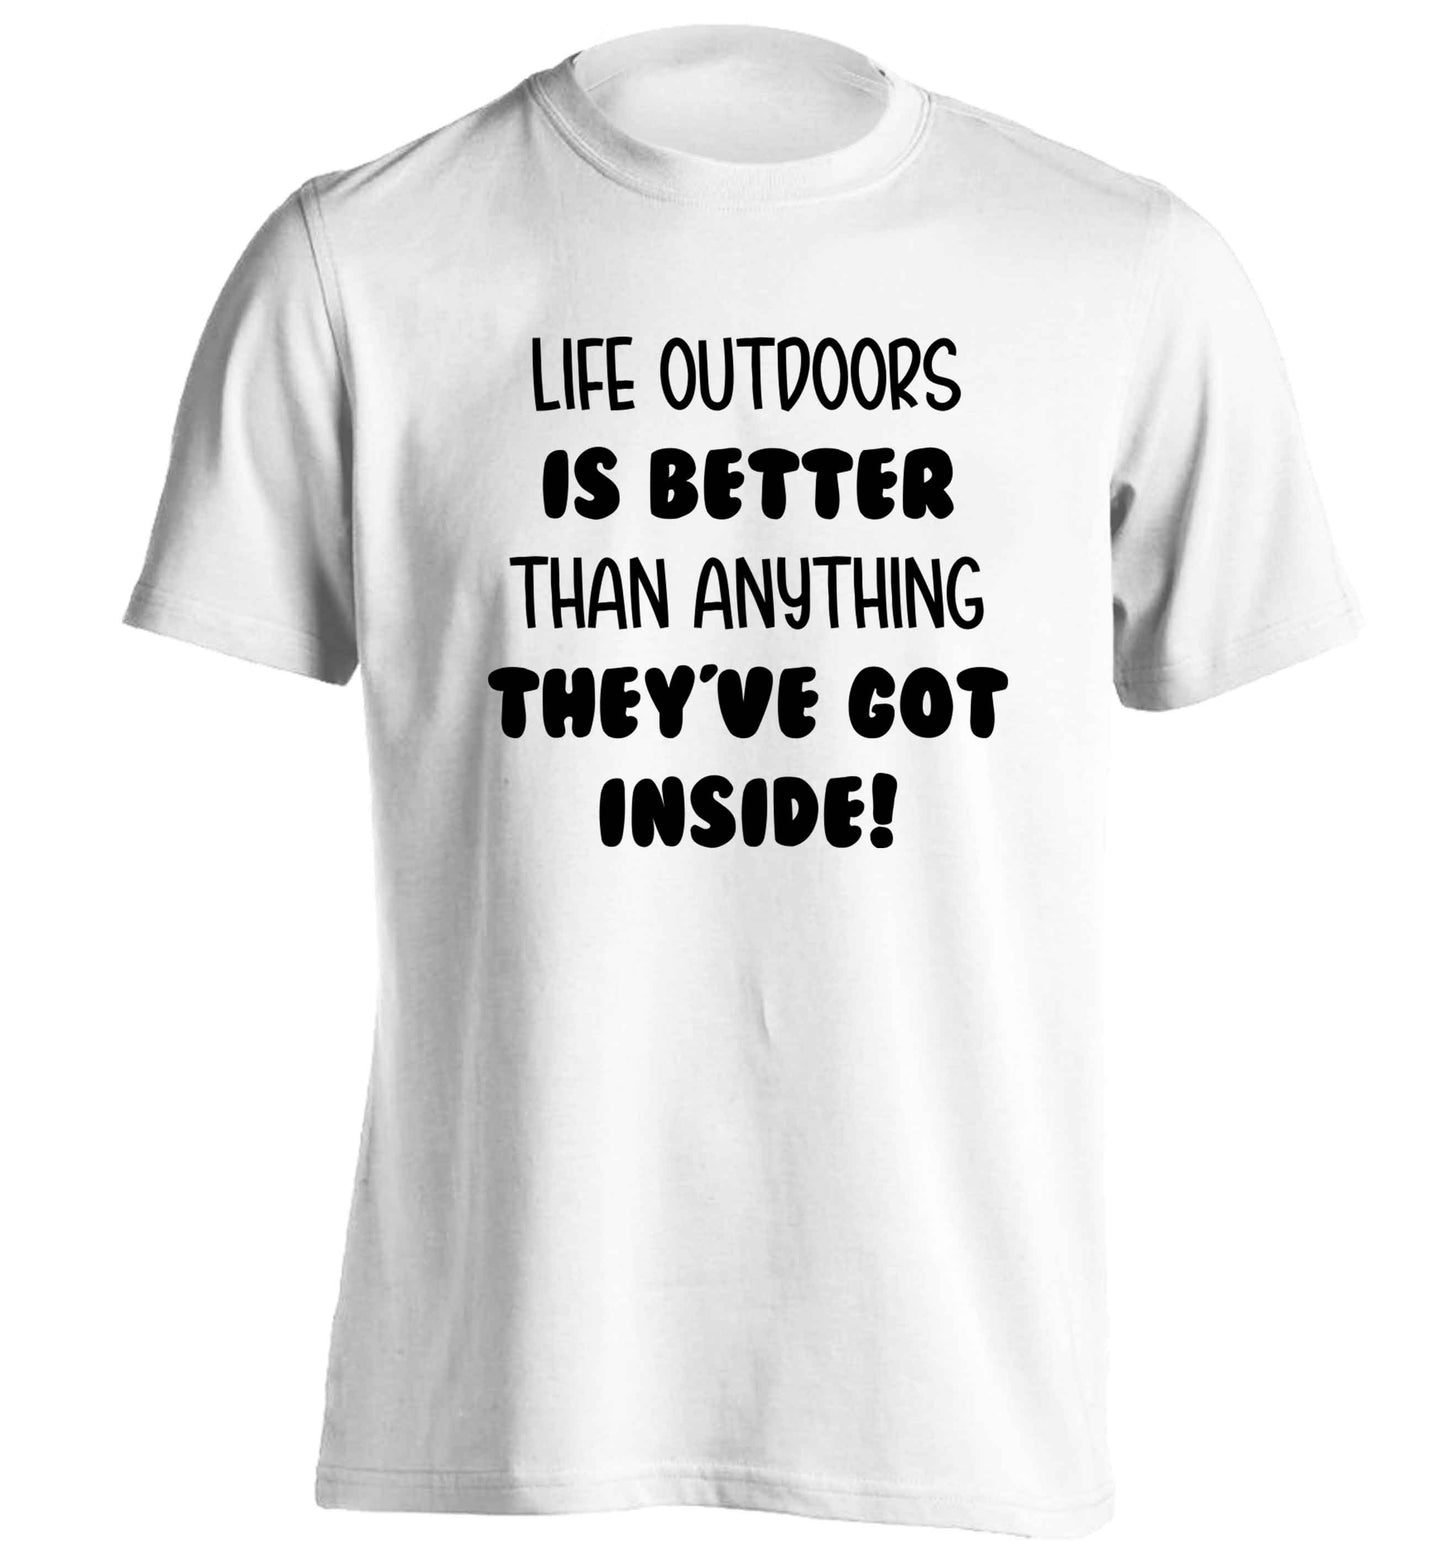 Life outdoors is better than anything they've go inside adults unisex white Tshirt 2XL